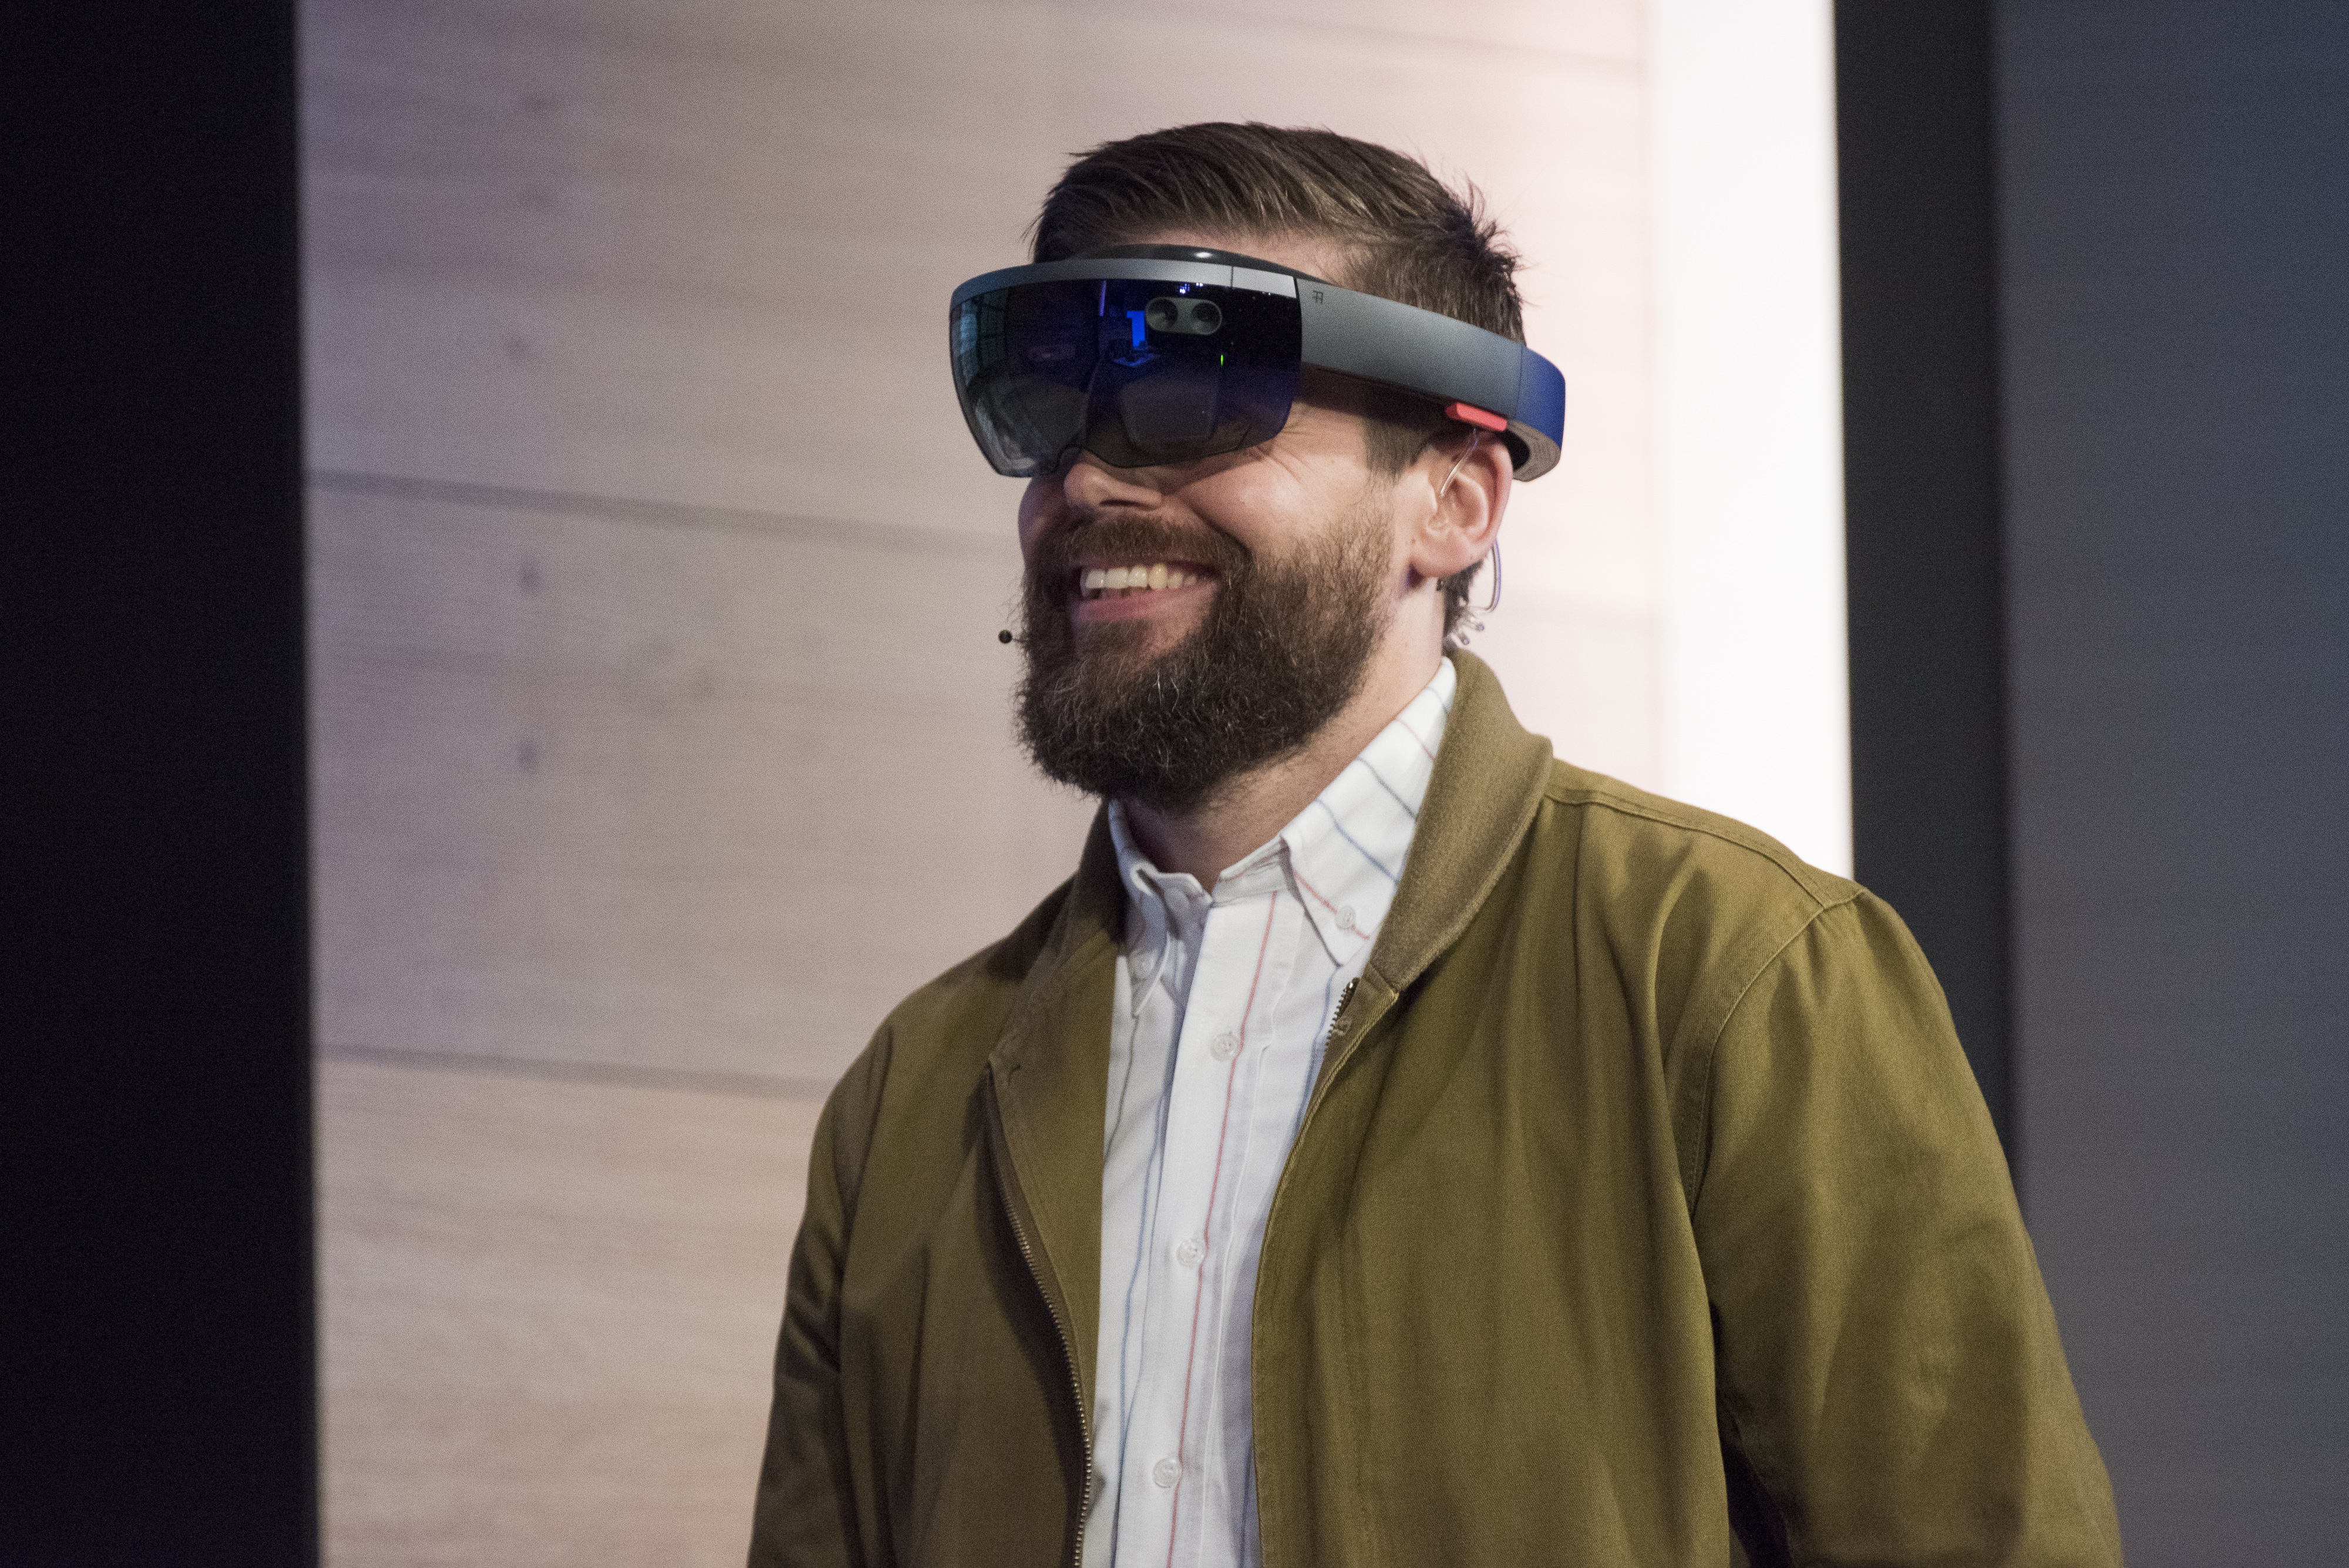 The Microsoft Corp. HoloLens augmented reality headset is demonstrated during a keynote session at the Microsoft Developers Build Conference in San Francisco, California, U.S., on Wednesday, April 29, 2015. (Bloomberg—Bloomberg via Getty Images)